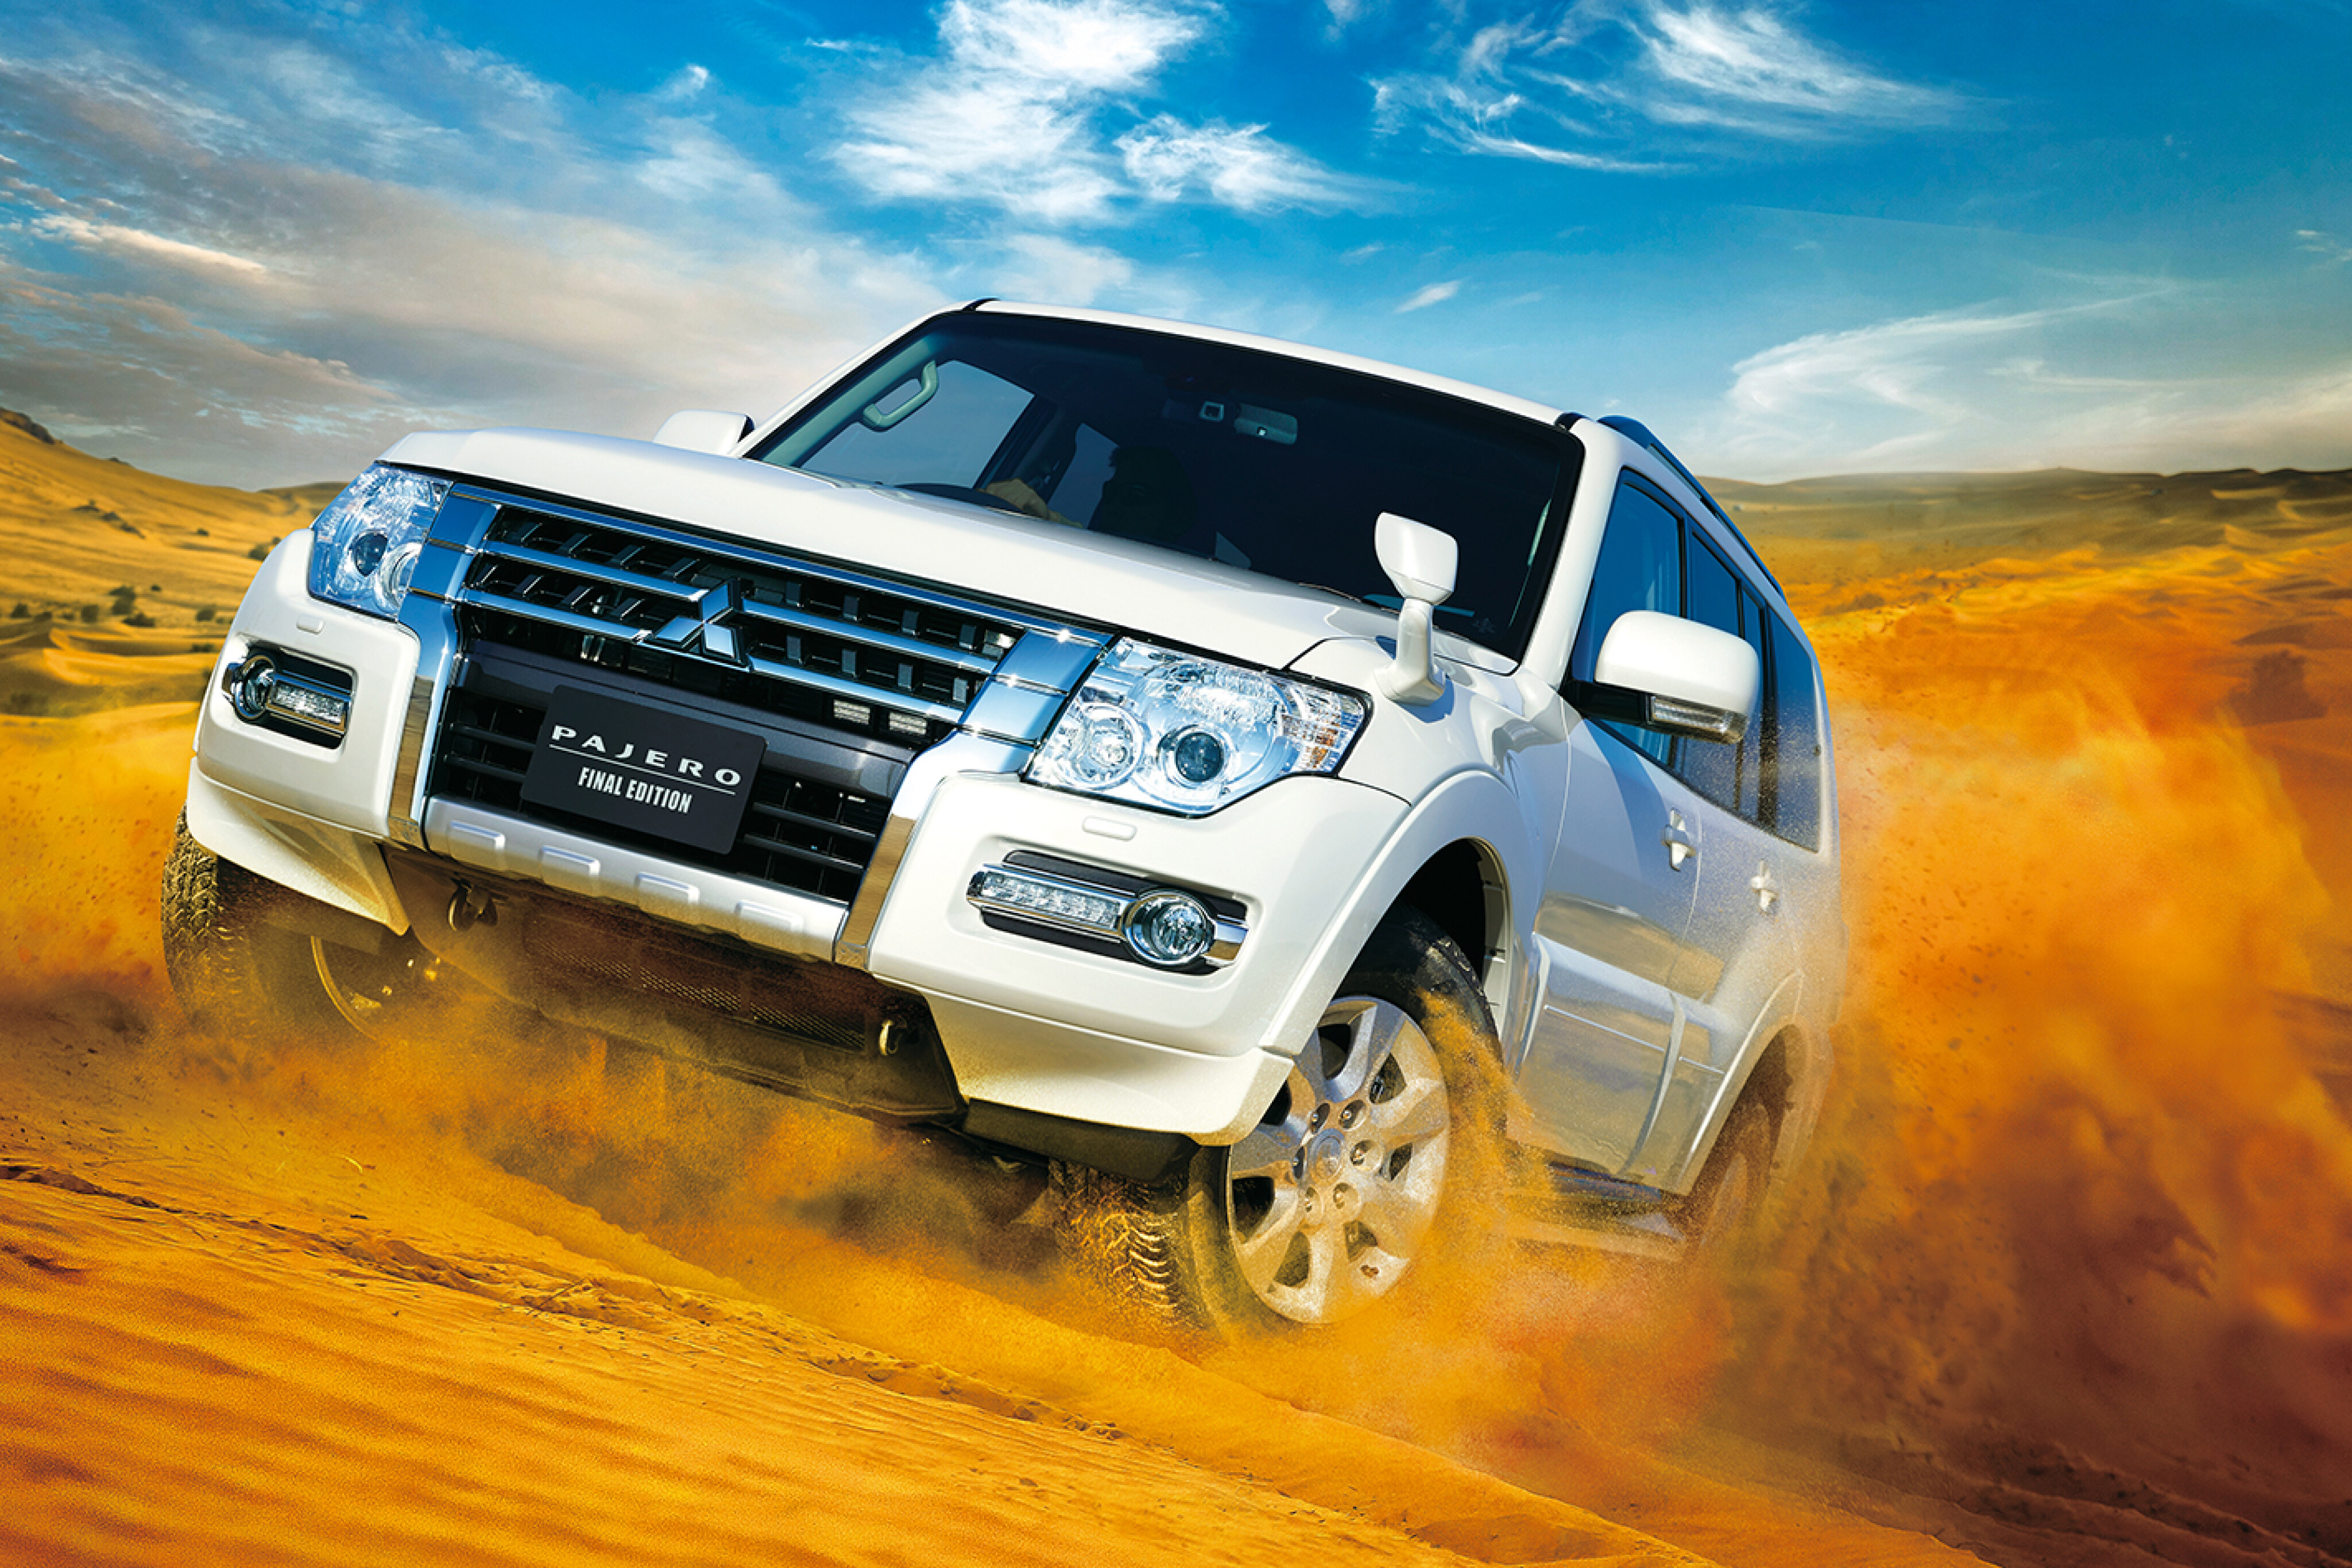 d0d60b29/2019 mitsubishi pajero final front side action jpg